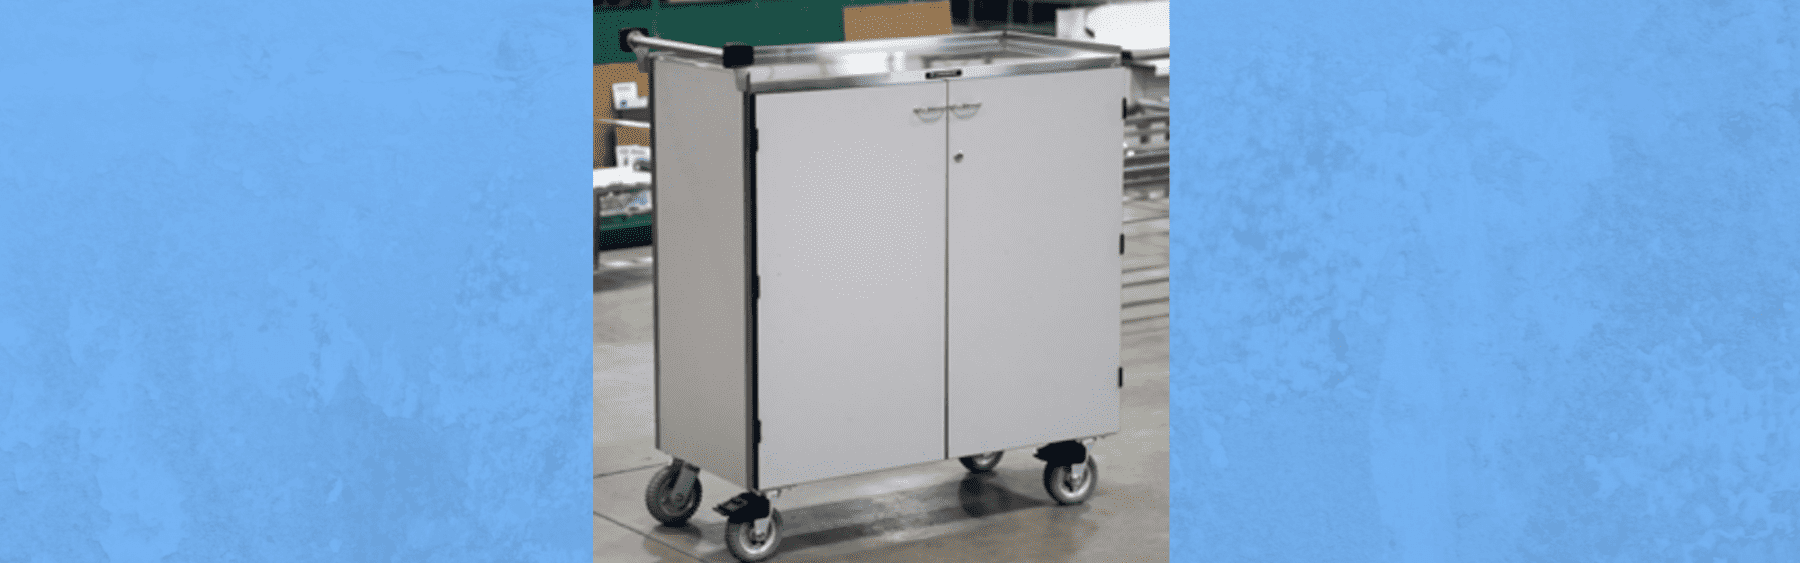 custom delivery and bussing cart